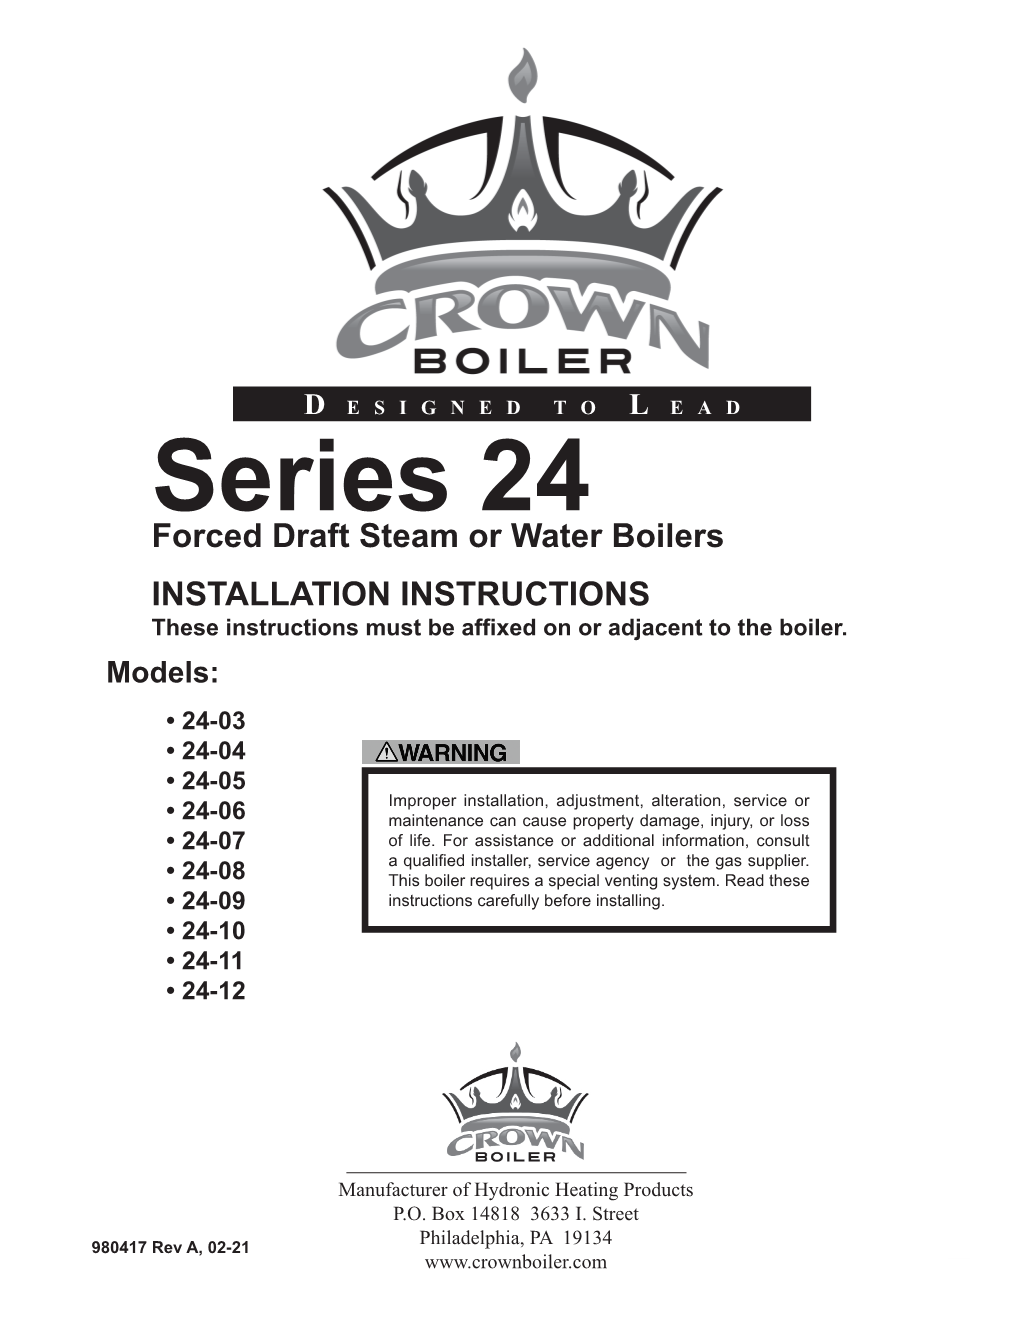 Series 24 Cast Iron Boilers Are Designed, Built, Marked and Tested in Accordance with the ASME Boiler and Pressure Vessel Code, Section IV, Heating Boilers